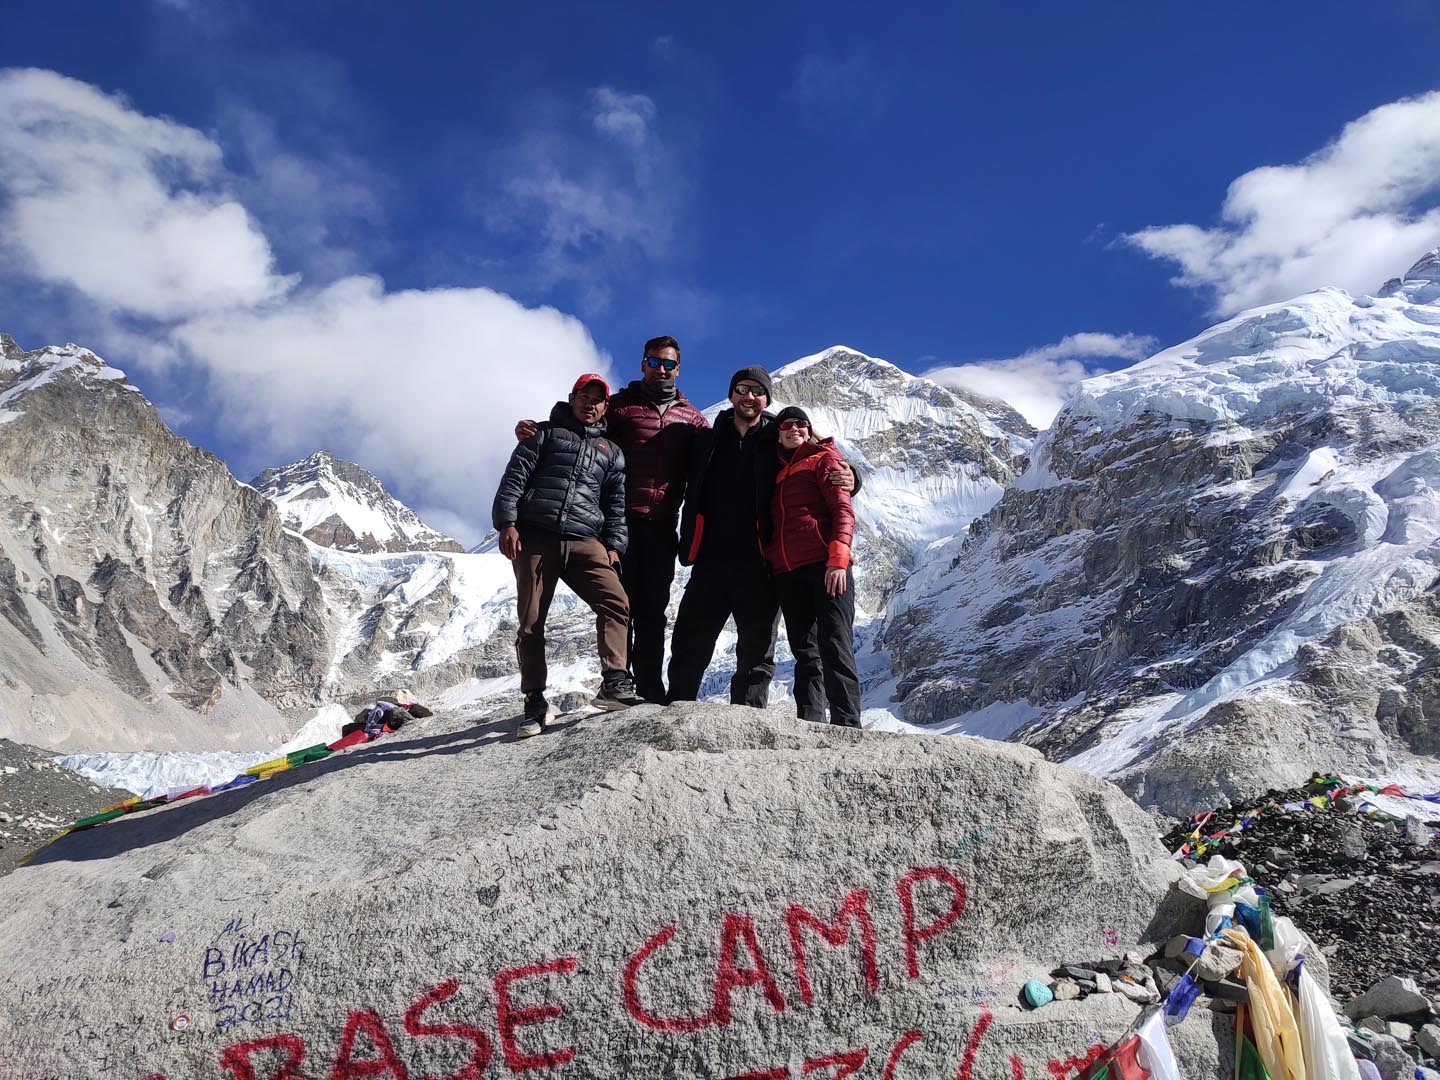 Deatination reached! Everest Base Camp at 5364m